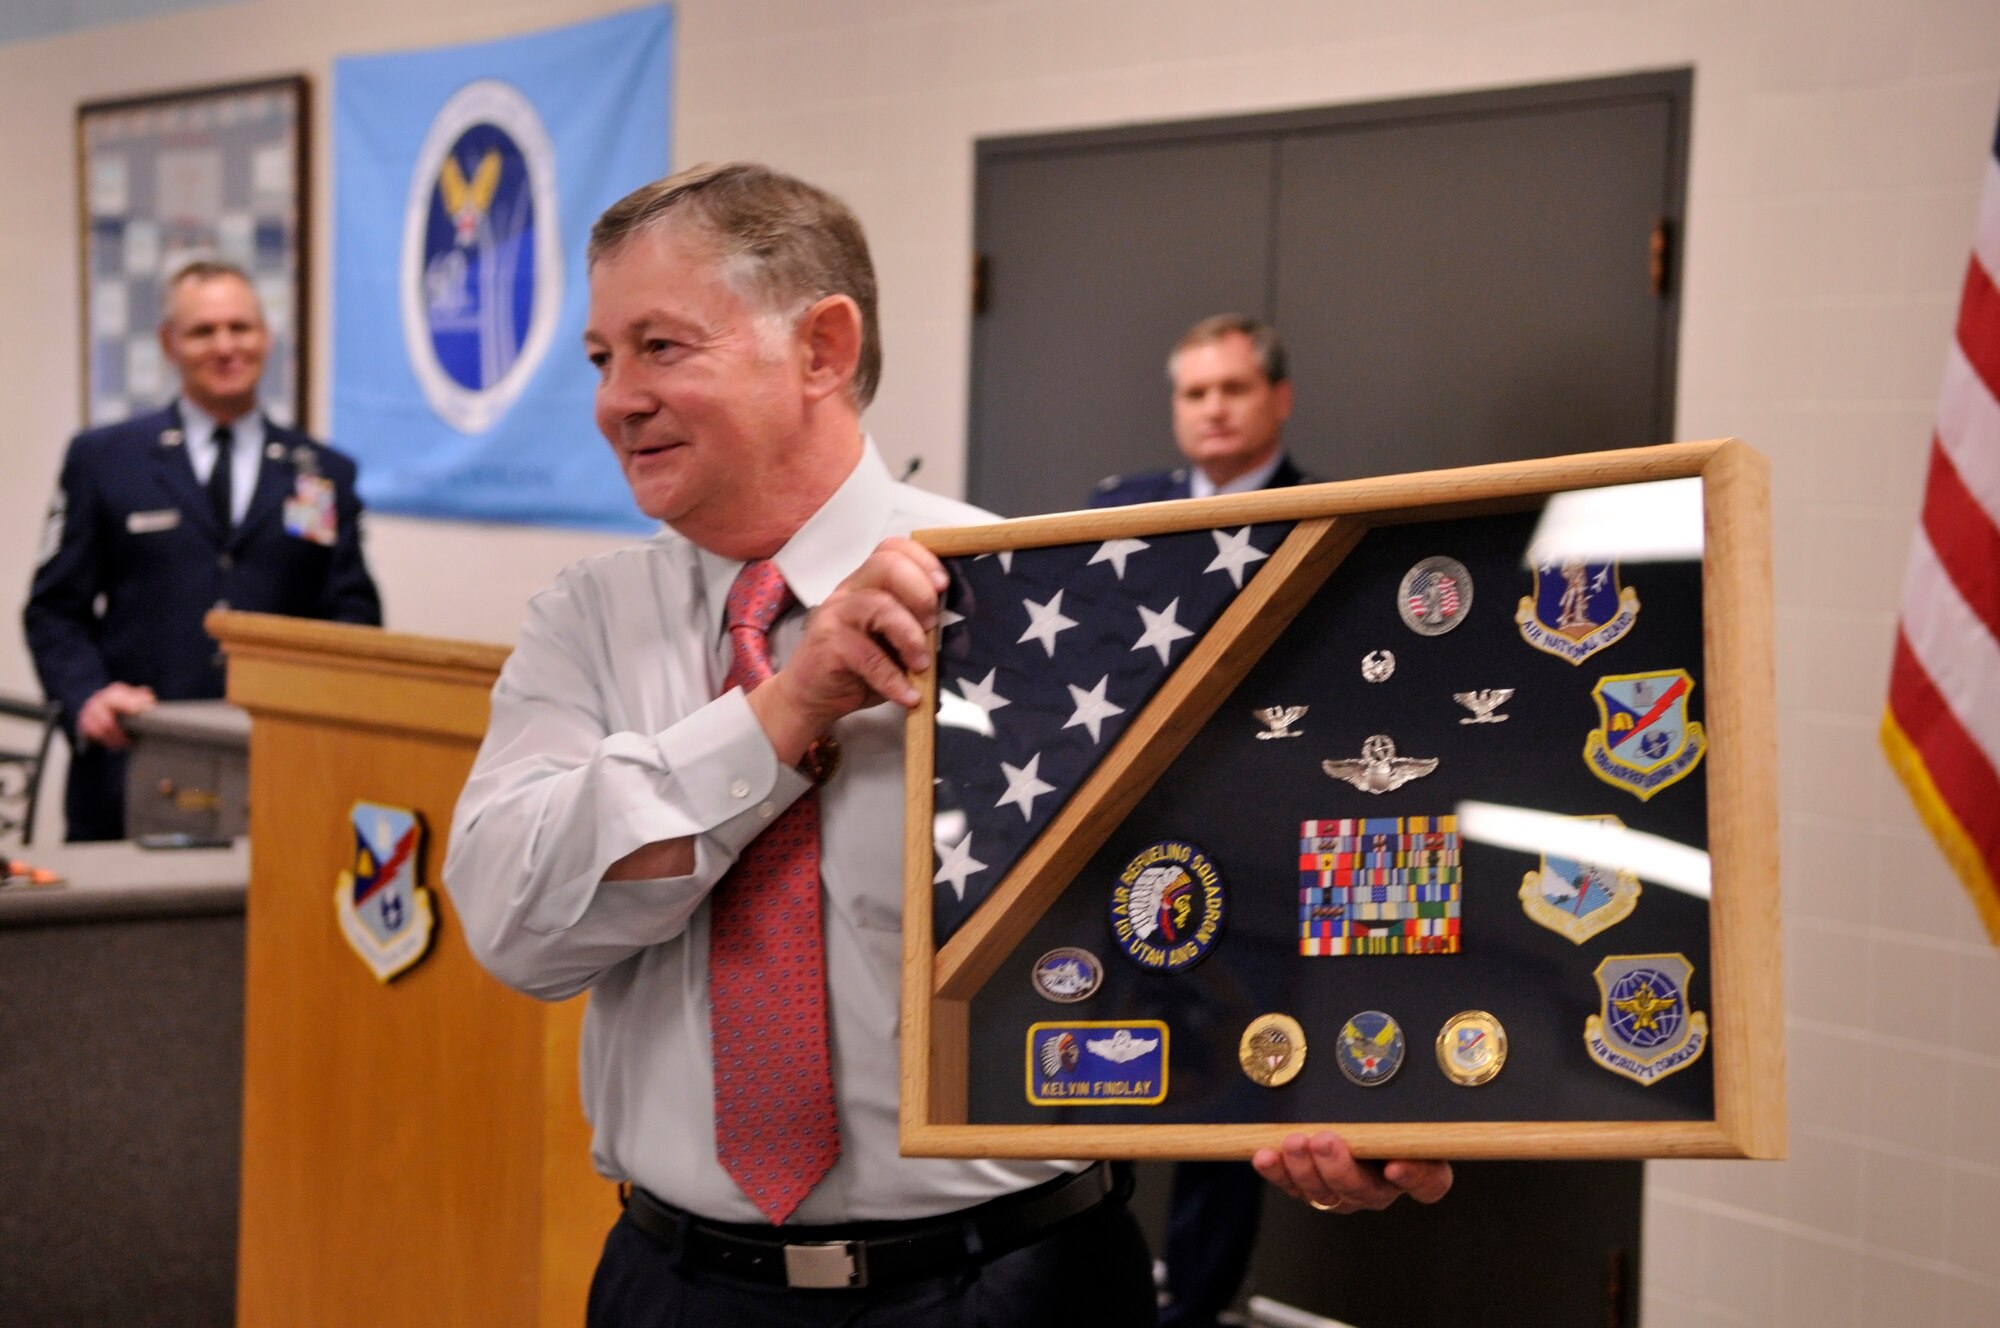 U.S. Air Force Col. Kelvin G. Findlay displays a shadowbox given to him at his retirement ceremony at the Utah Air National Guard Base, Salt Lake City, Utah, January 7, 2012. Findlay served for 32 years in the Utah Air National Guard before retiring from military service. (U.S. Air Force Photo by TSgt Jeremy Giacoletto-Stegall/Released)